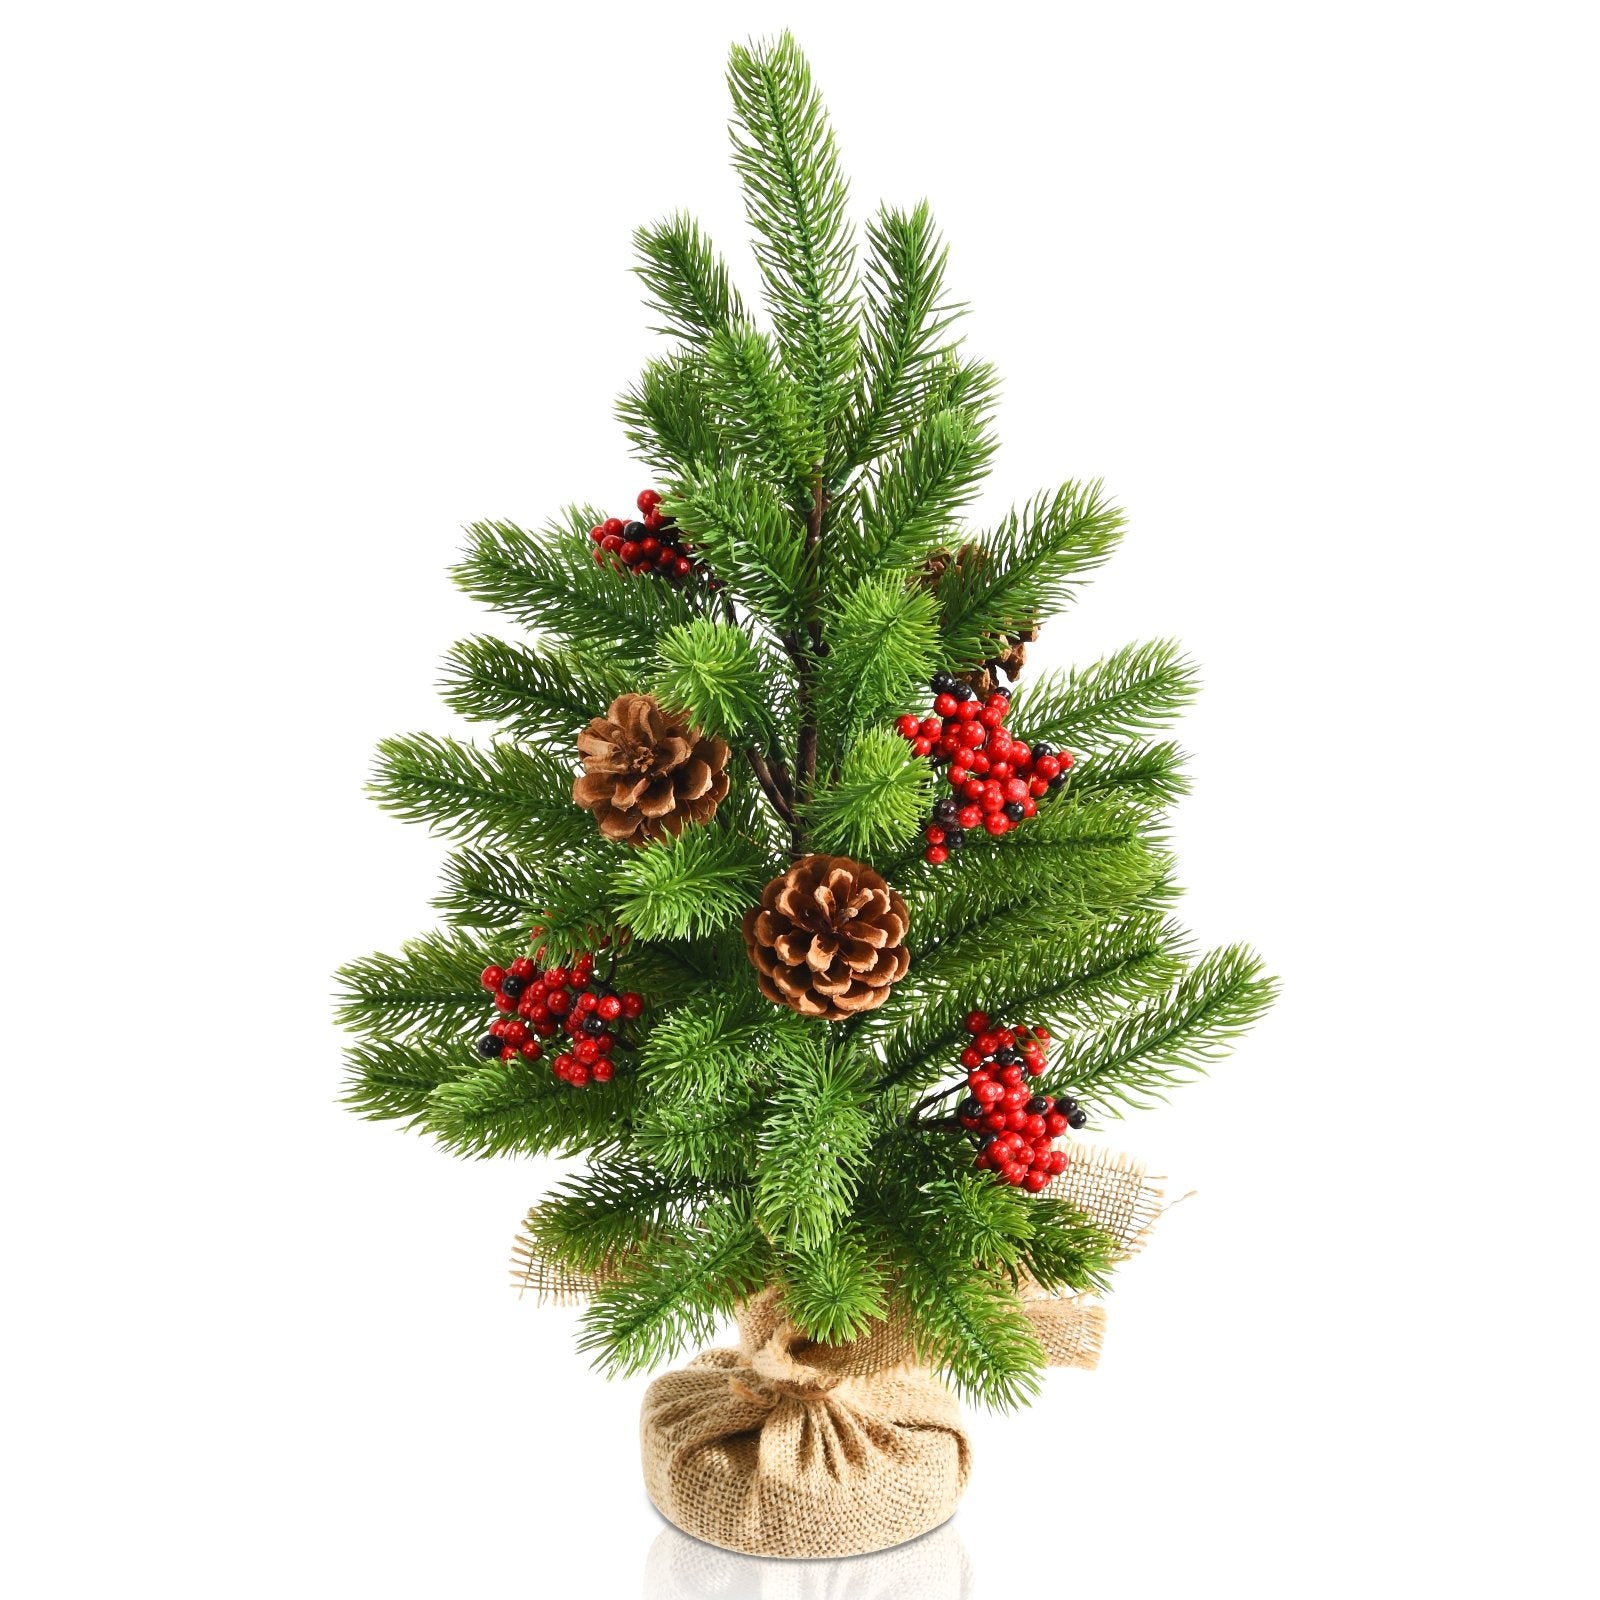 20 InchTabletop PE Christmas Tree Holiday Decor with Pine Cones and Red Berries-Boyel Living